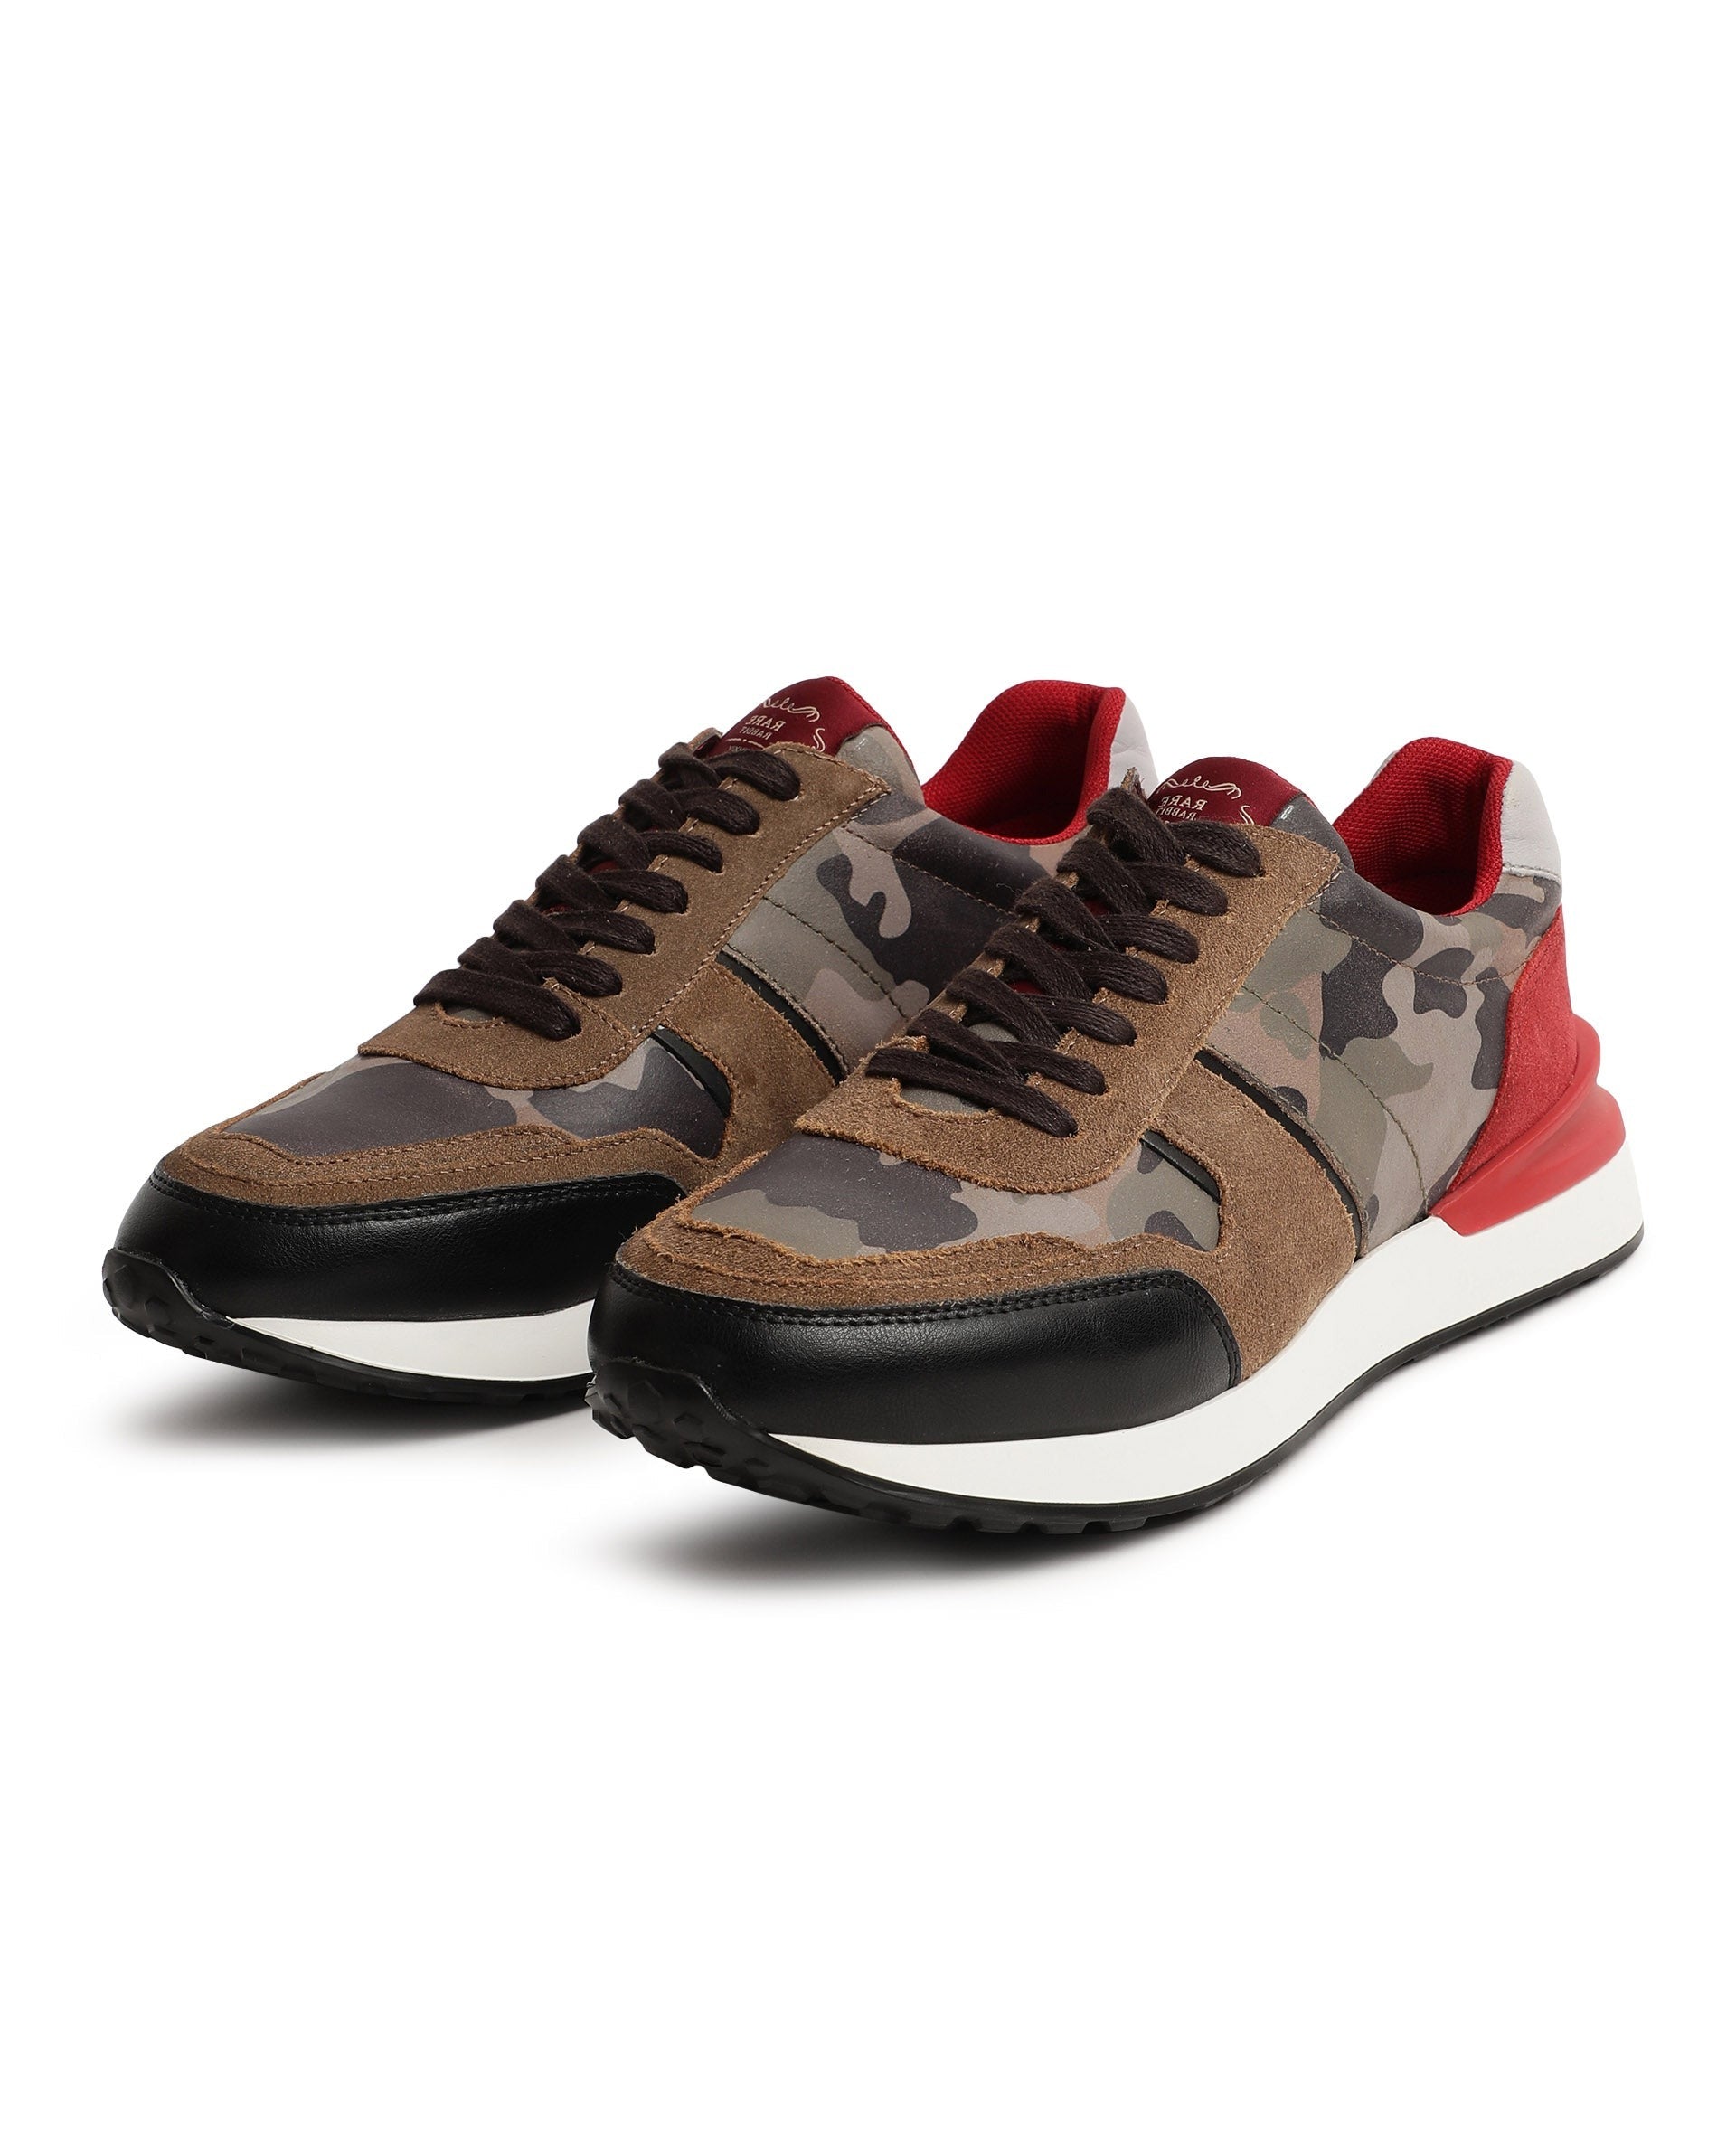 Discover more than 253 camouflage shoes best